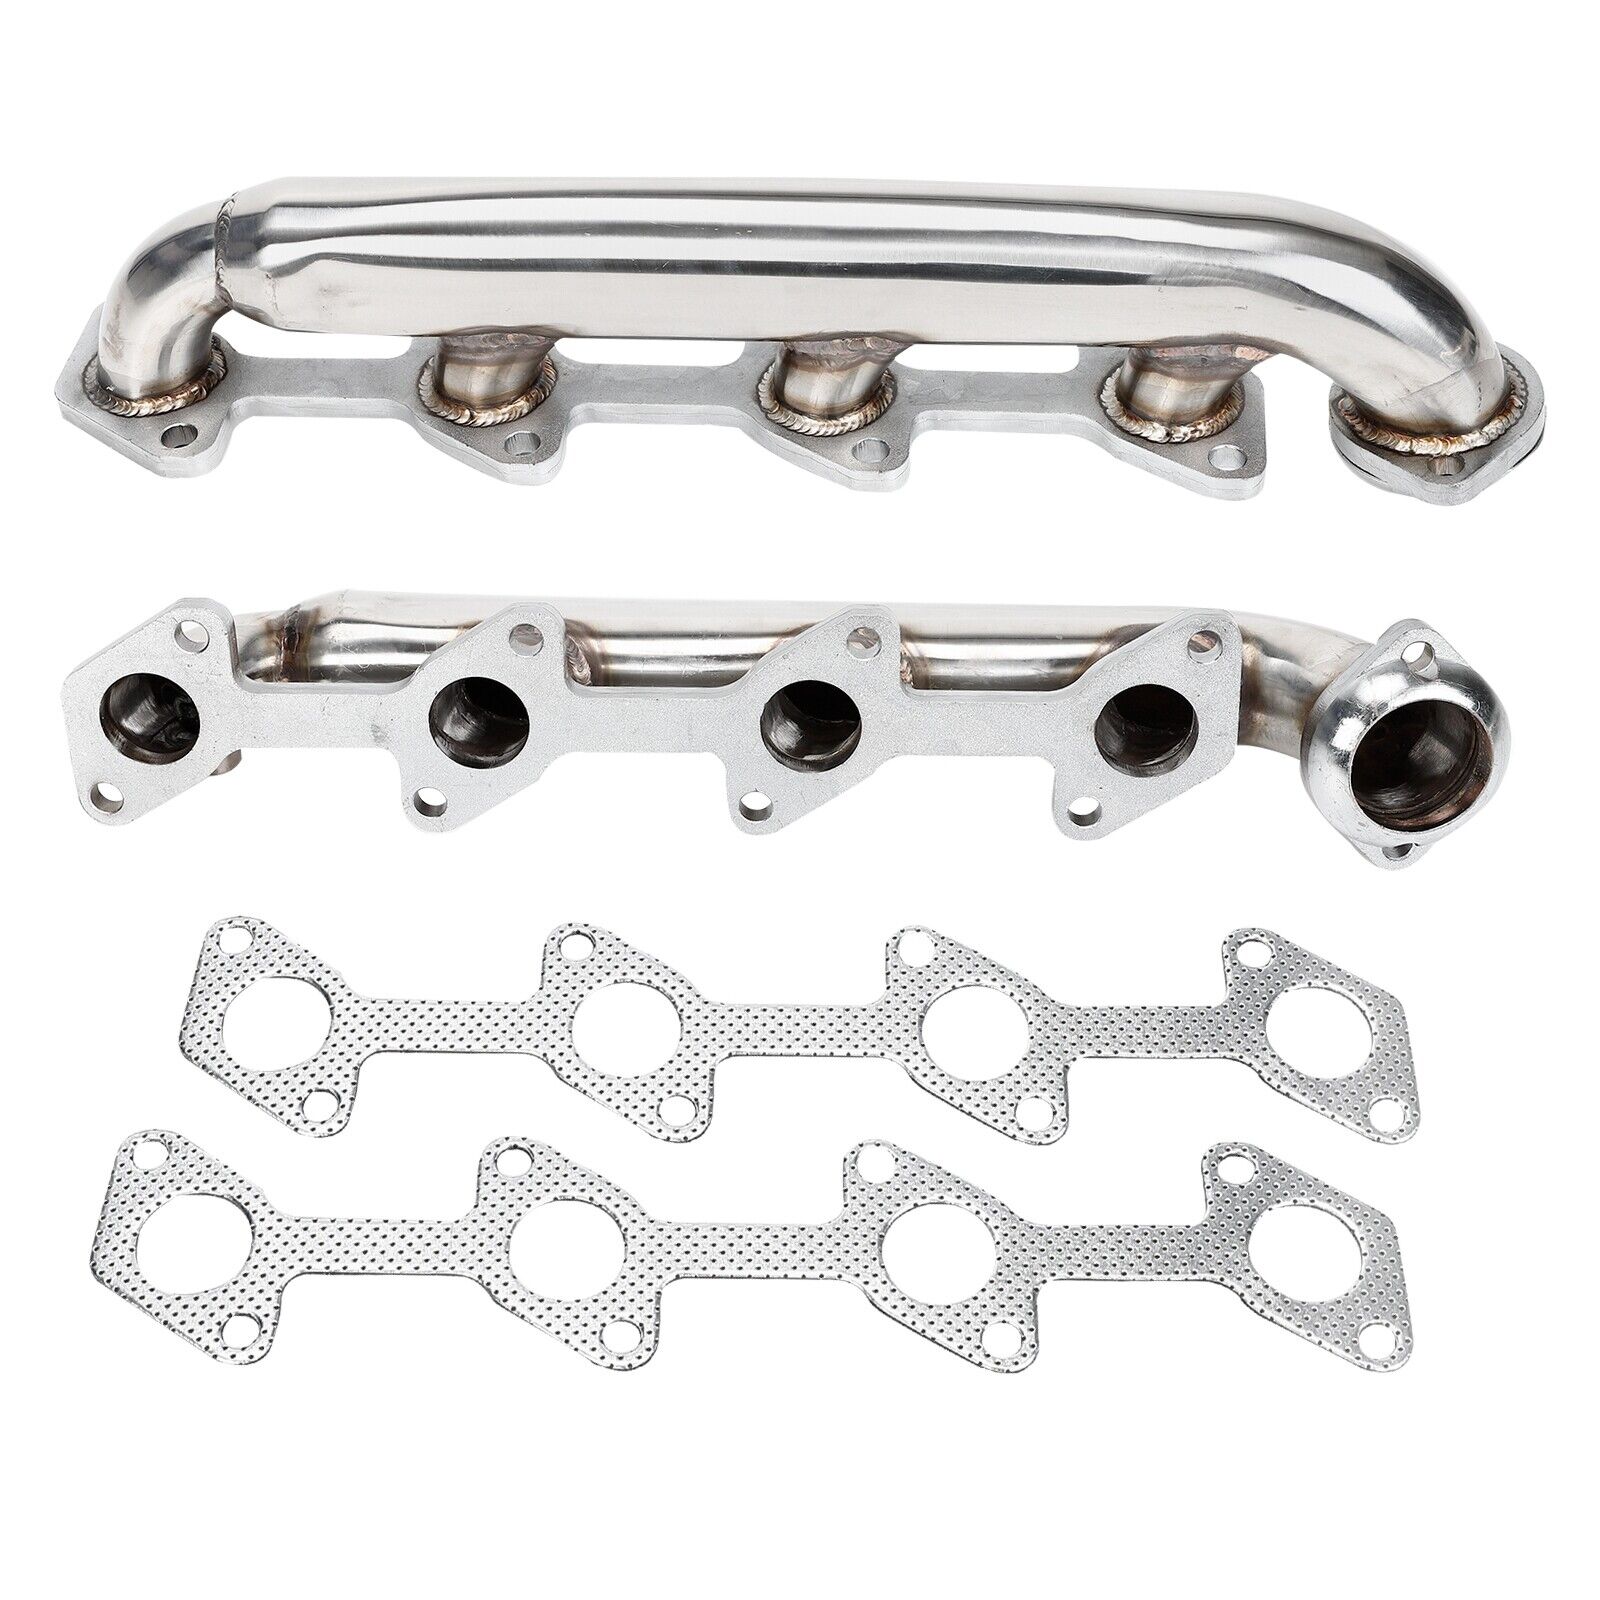 Stainless Steel Manifold Headers  For 03-07 Ford Powerstroke F250 F350 6.0